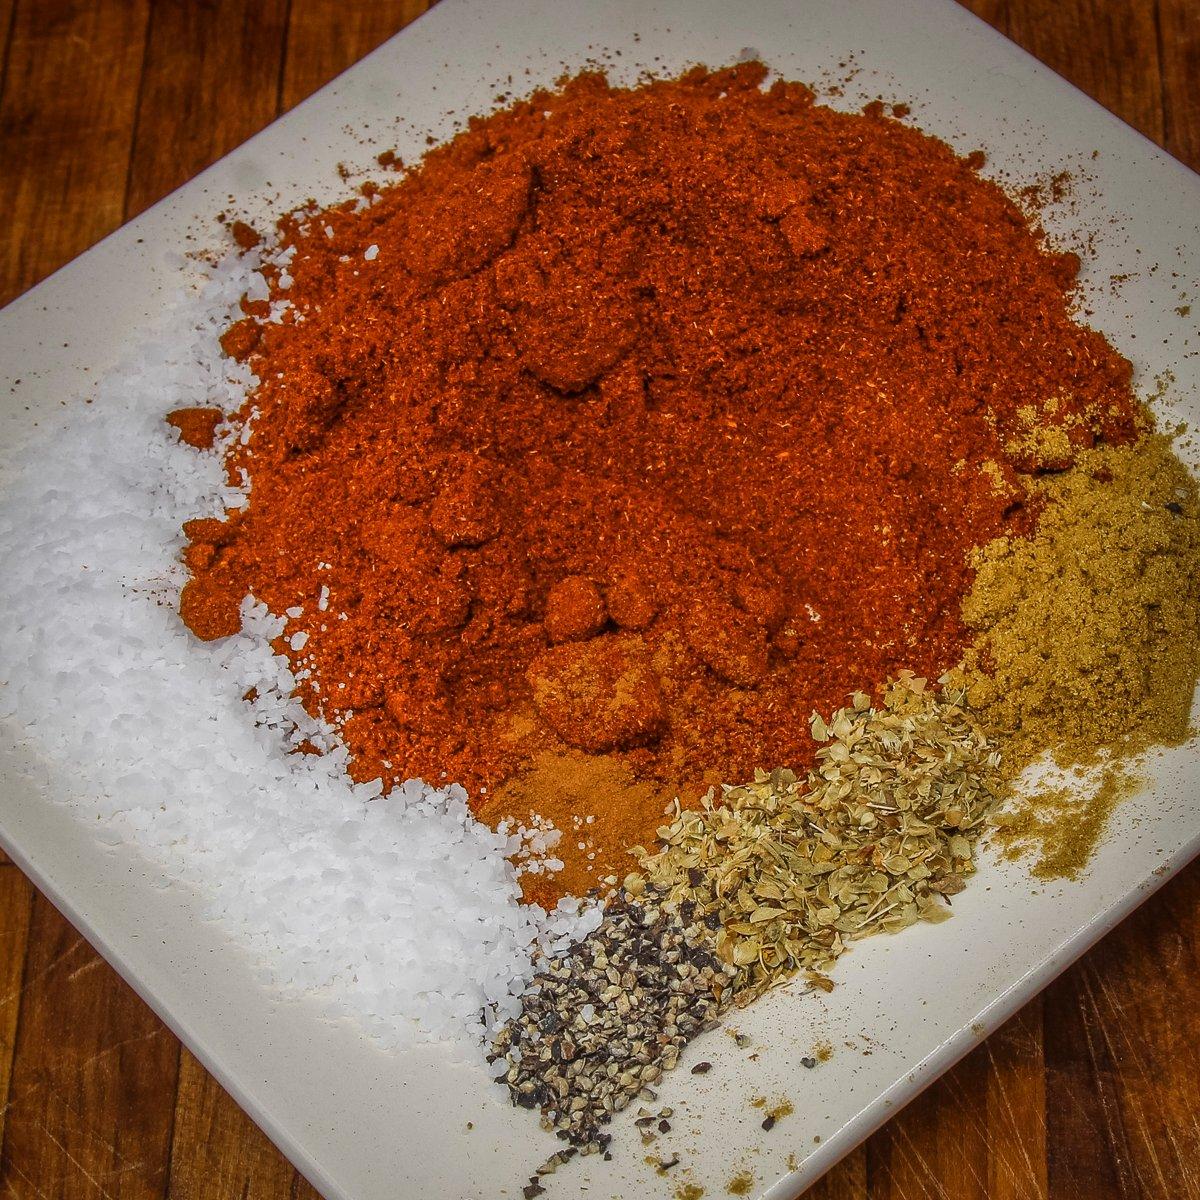 Measure the spices and seasonings.